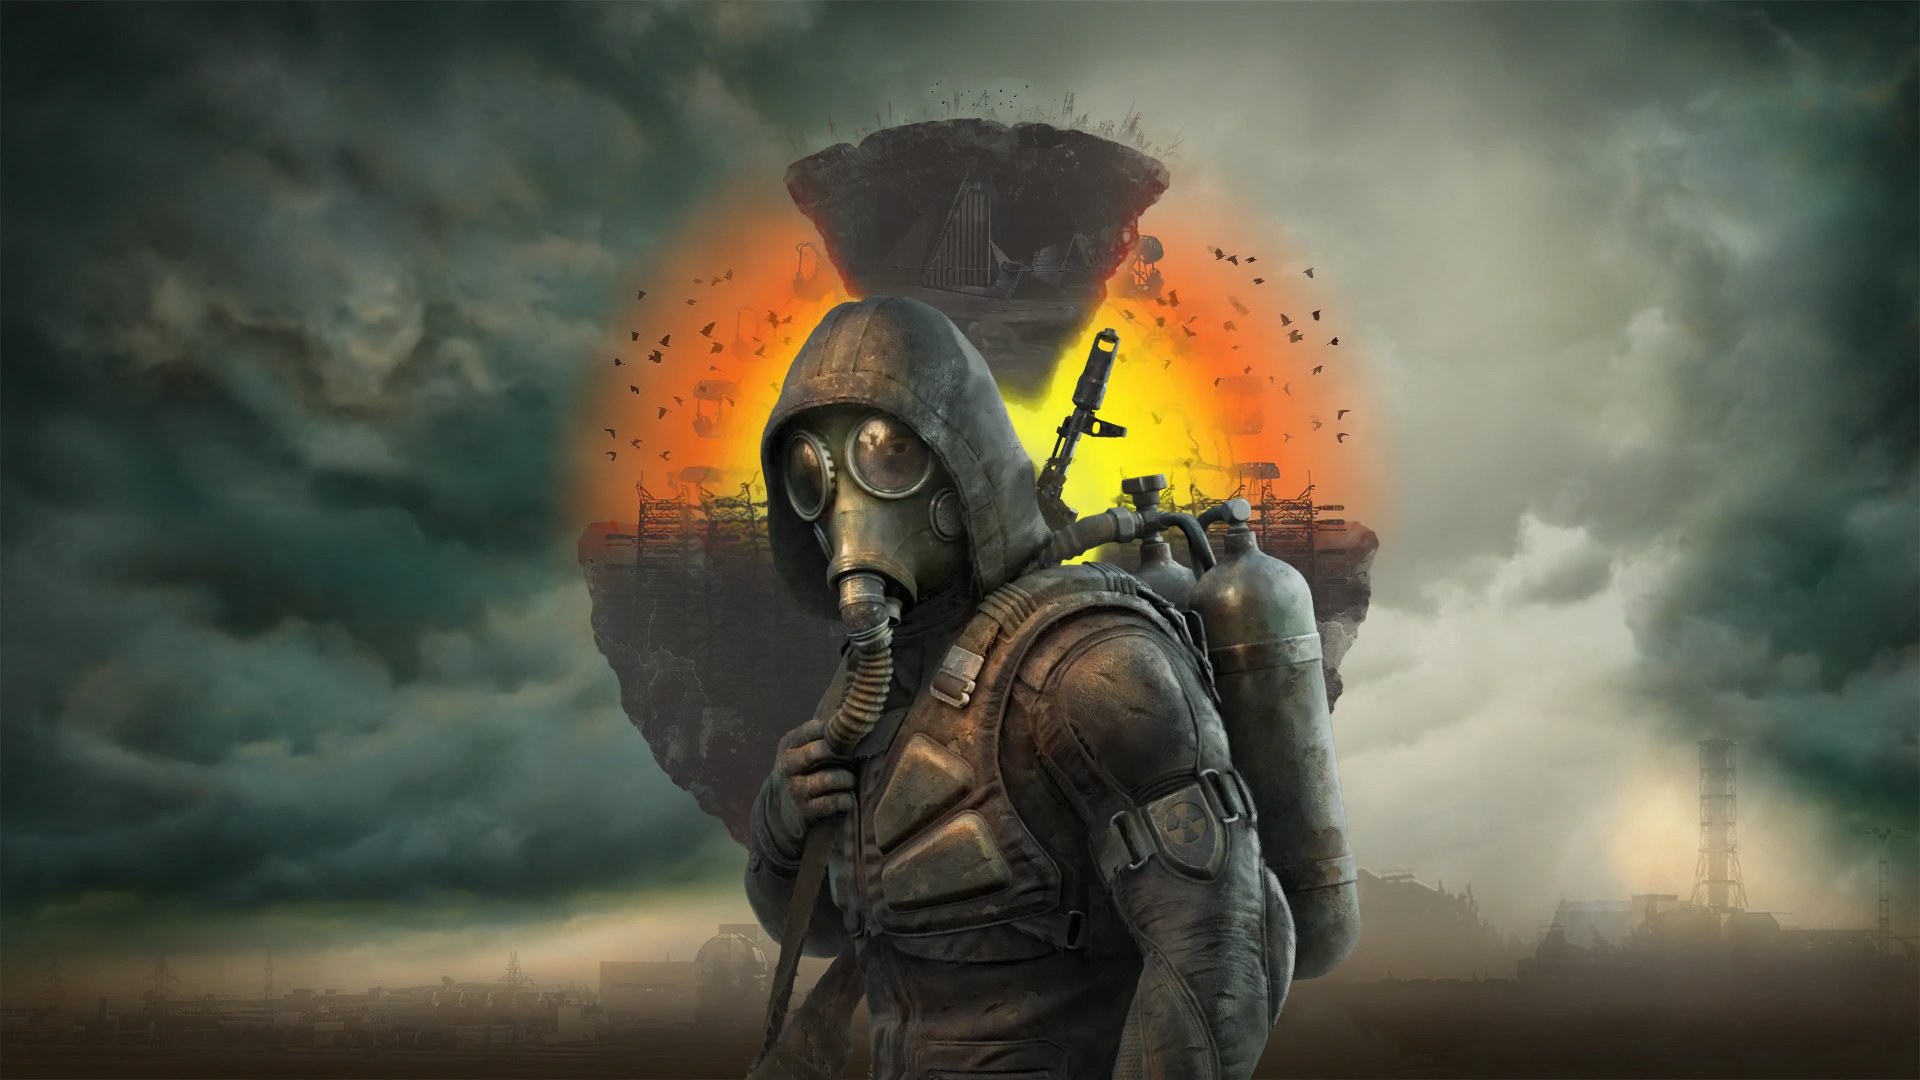 STALKER 2: Heart of Chornobyl Gets a New Trailer, Delayed to 2023